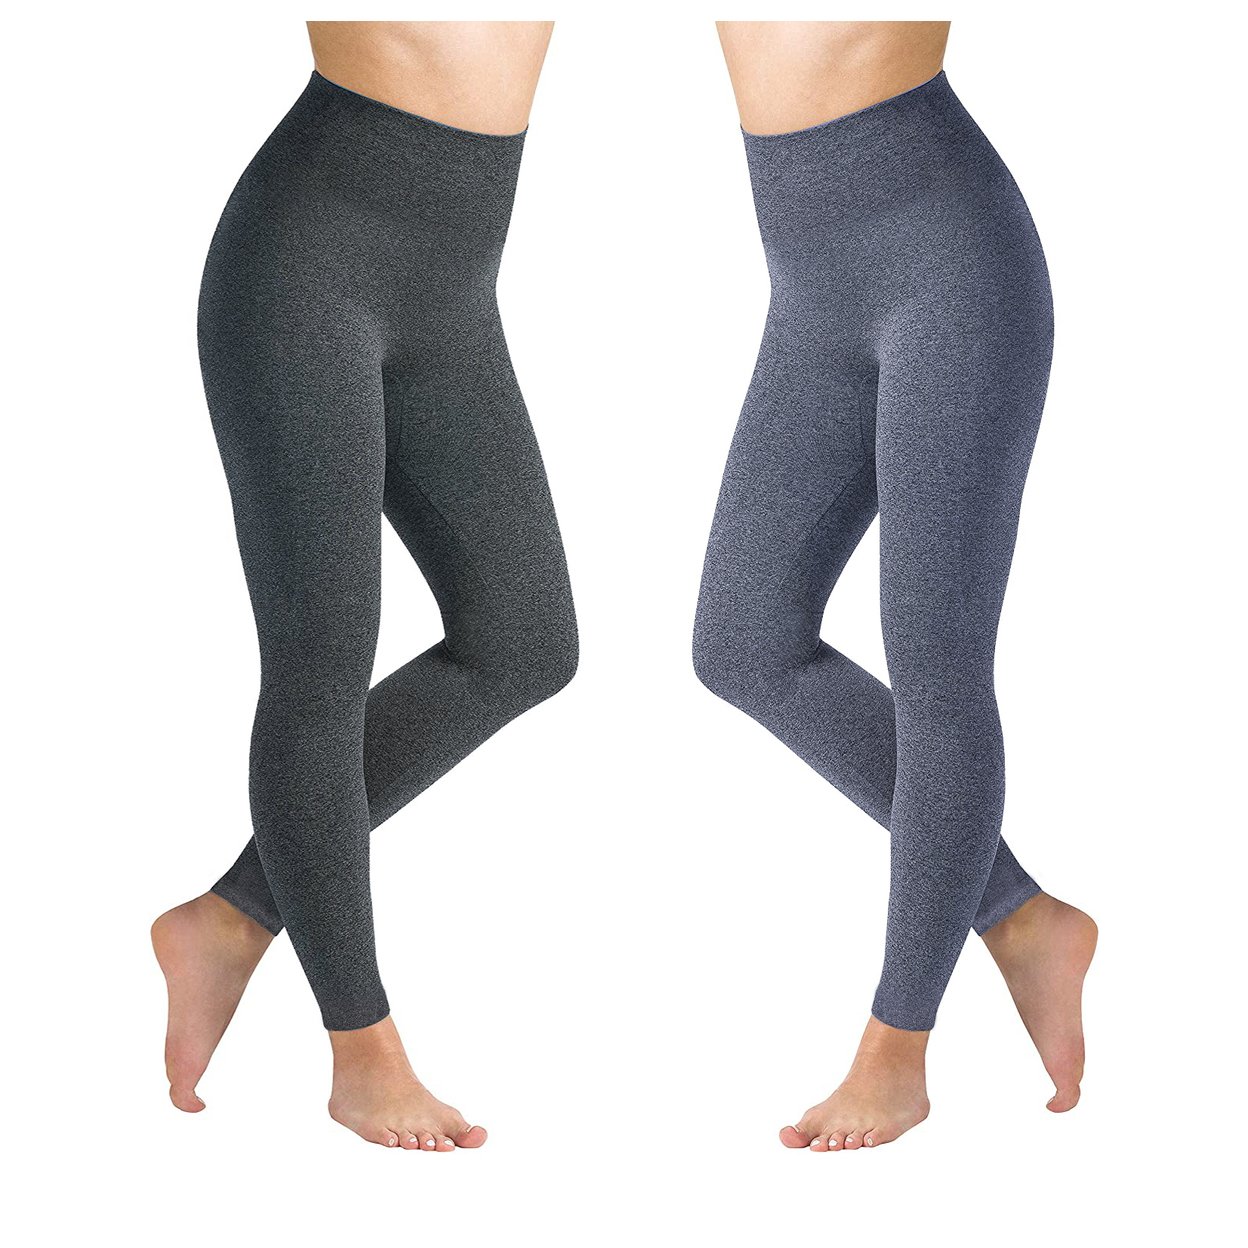 2-Pack: Women's High Waisted Ultra Soft Fleece Lined Warm Marled Leggings(Available In Plus Sizes) - Navy & Navy, X-large